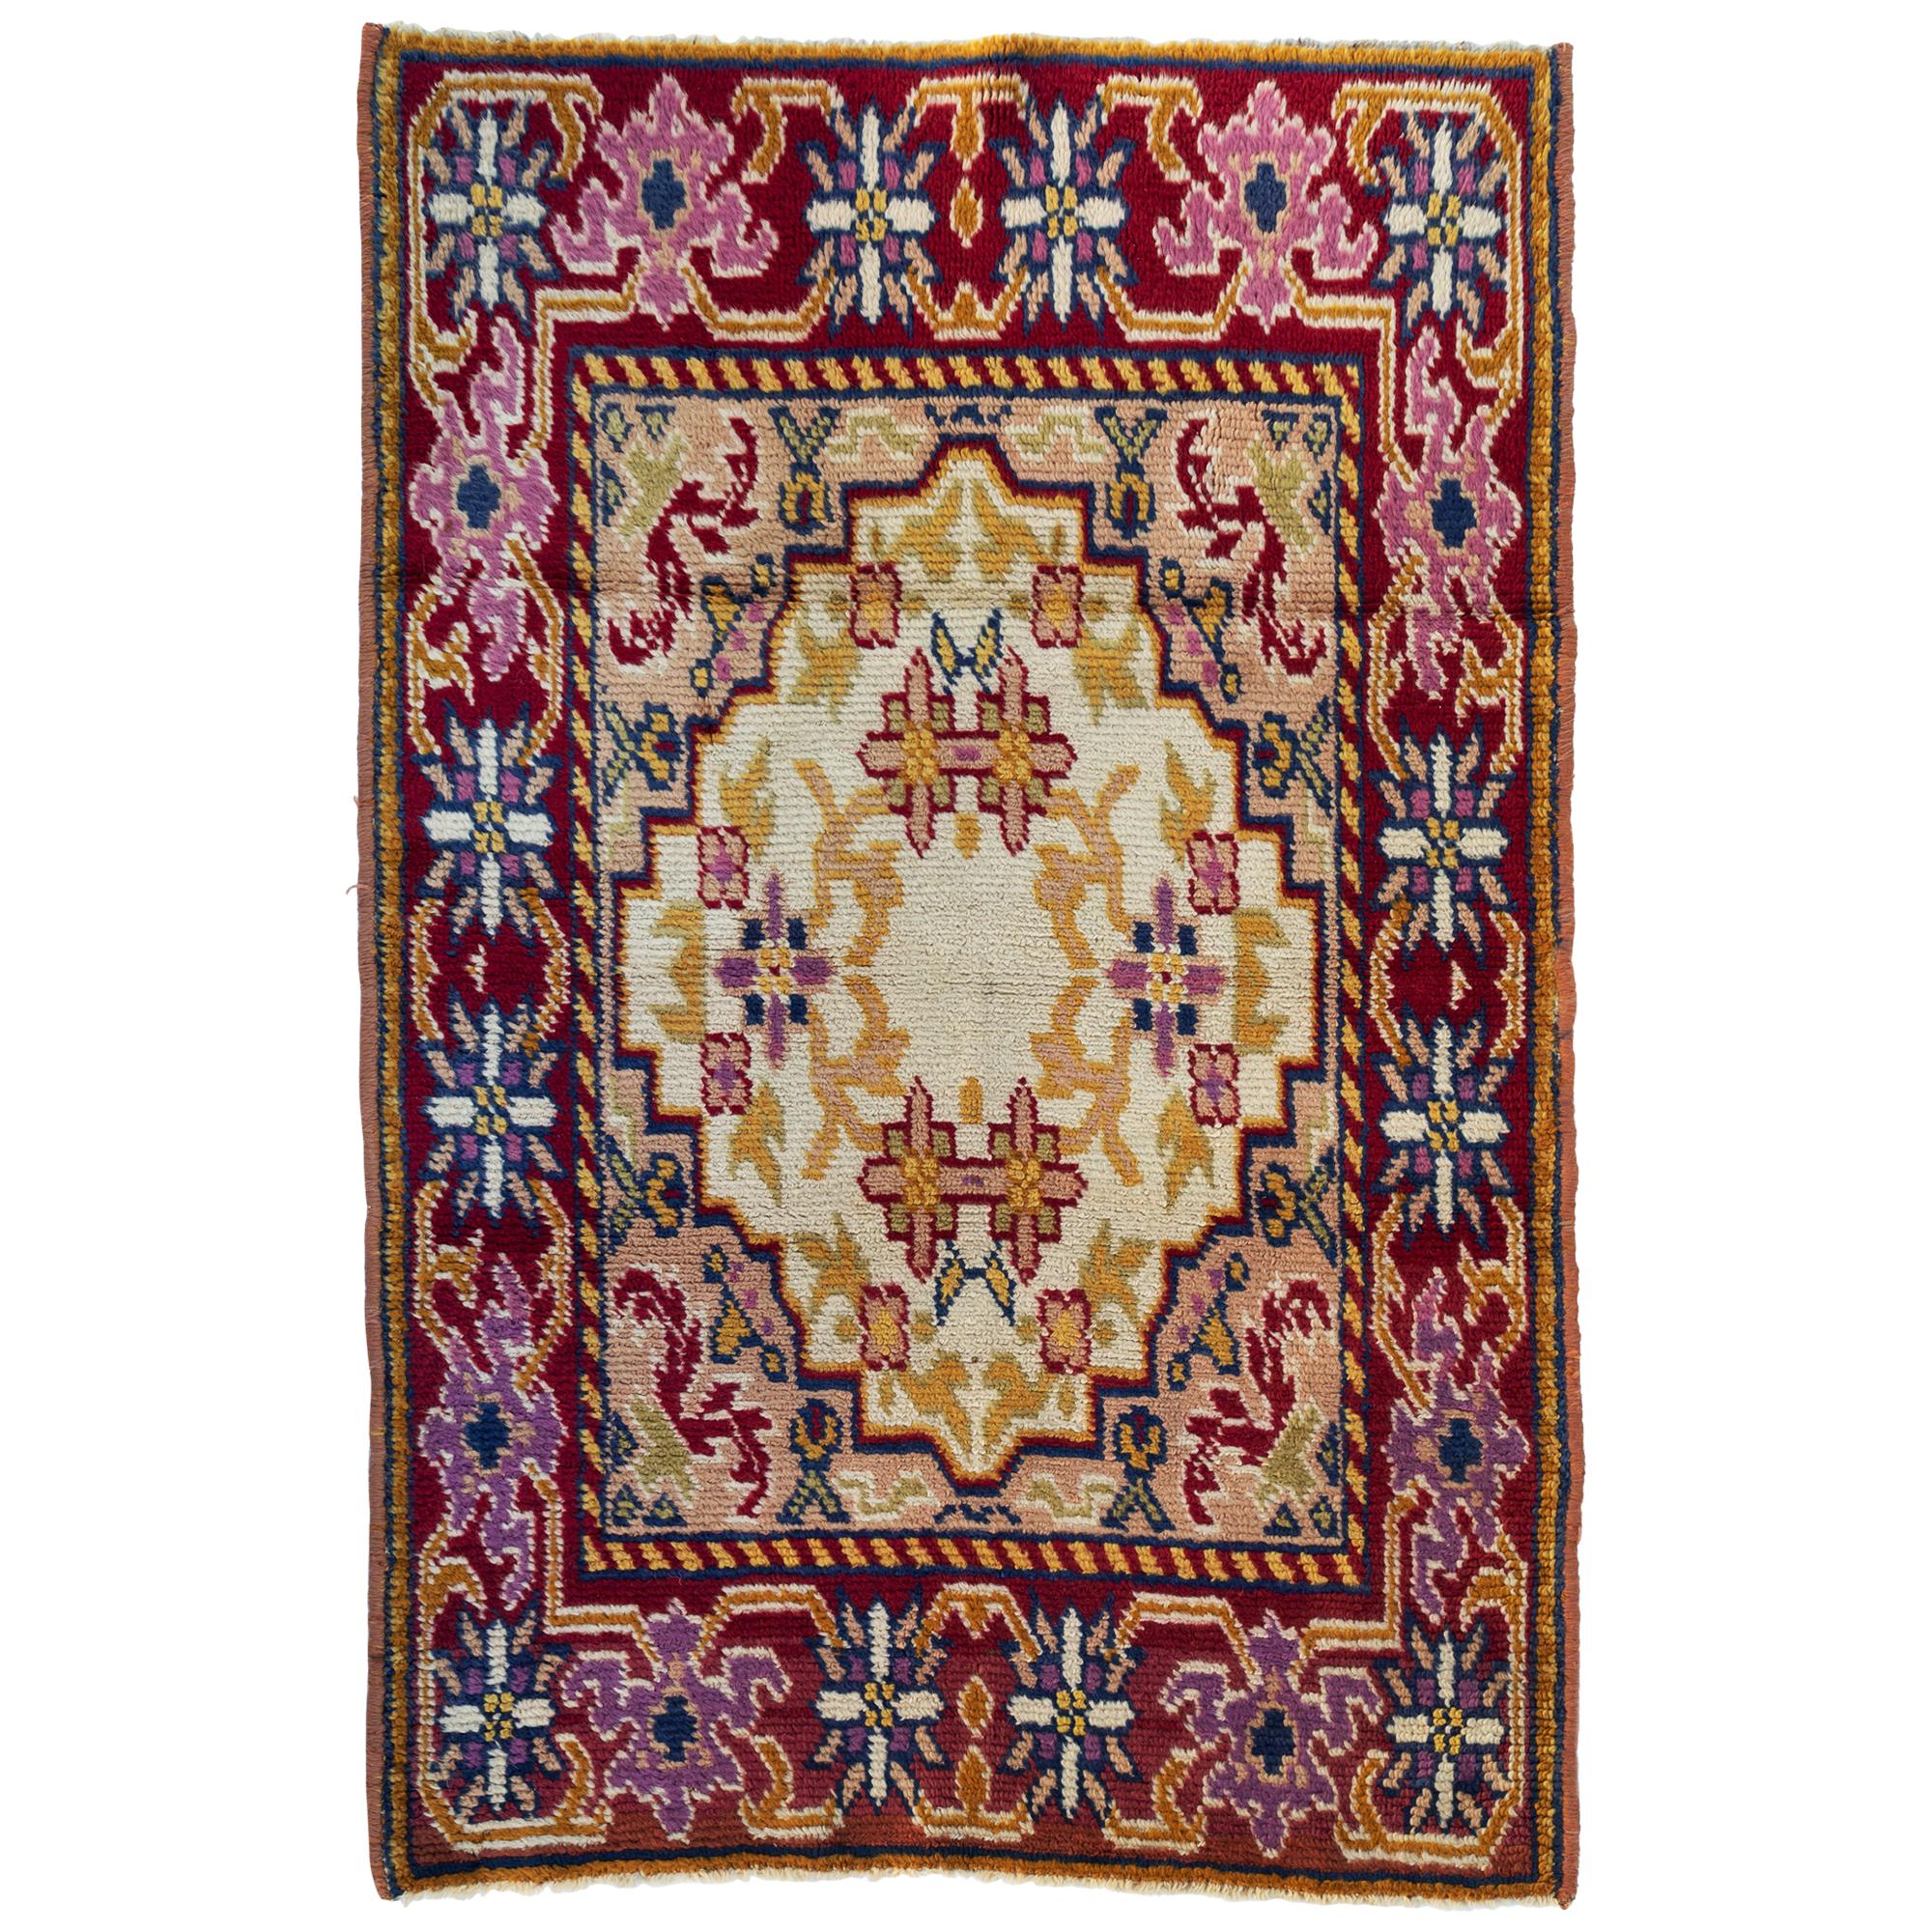 Vintage Gold Rose Ivory Floral Spanish Savonnerie Small Rug, circa 1940s